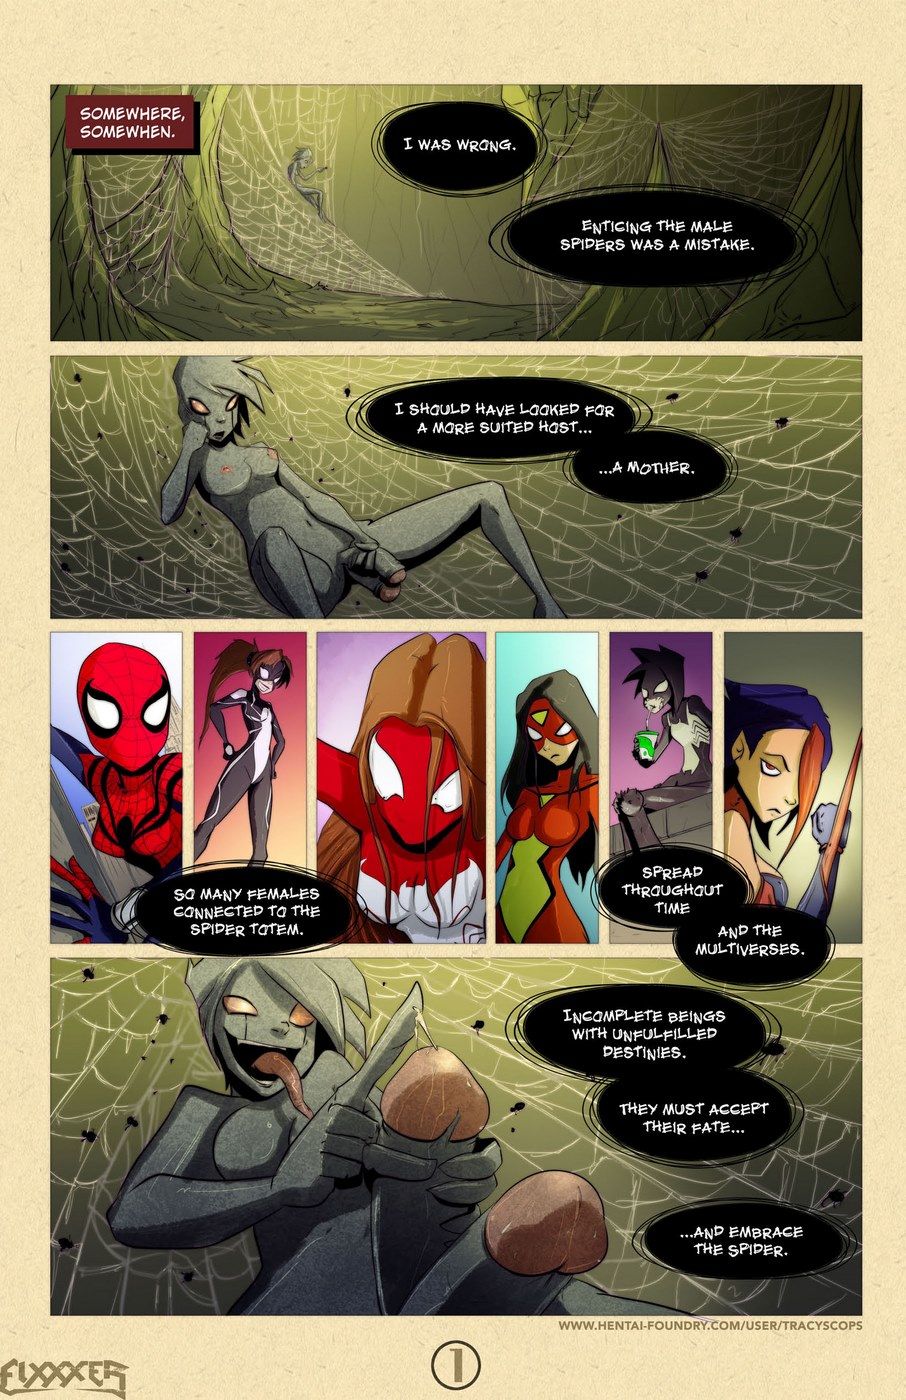 Violation of Spider Women - Tracy Scops page 3